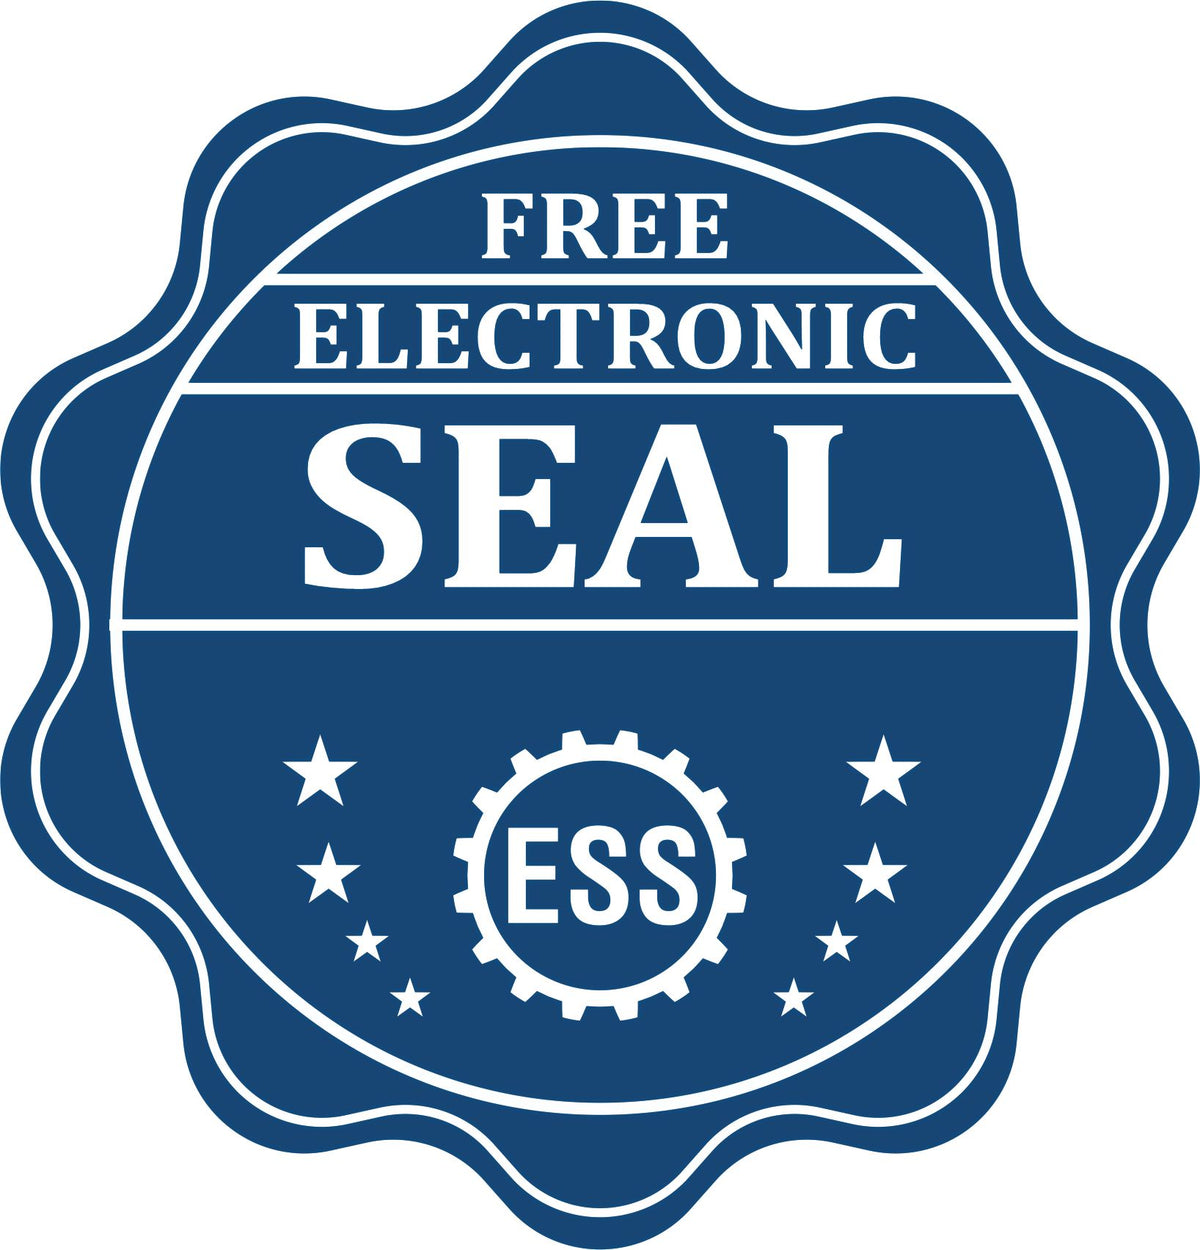 A badge showing a free electronic seal for the Heavy Duty Cast Iron Michigan Geologist Seal Embosser with stars and the ESS gear on the emblem.